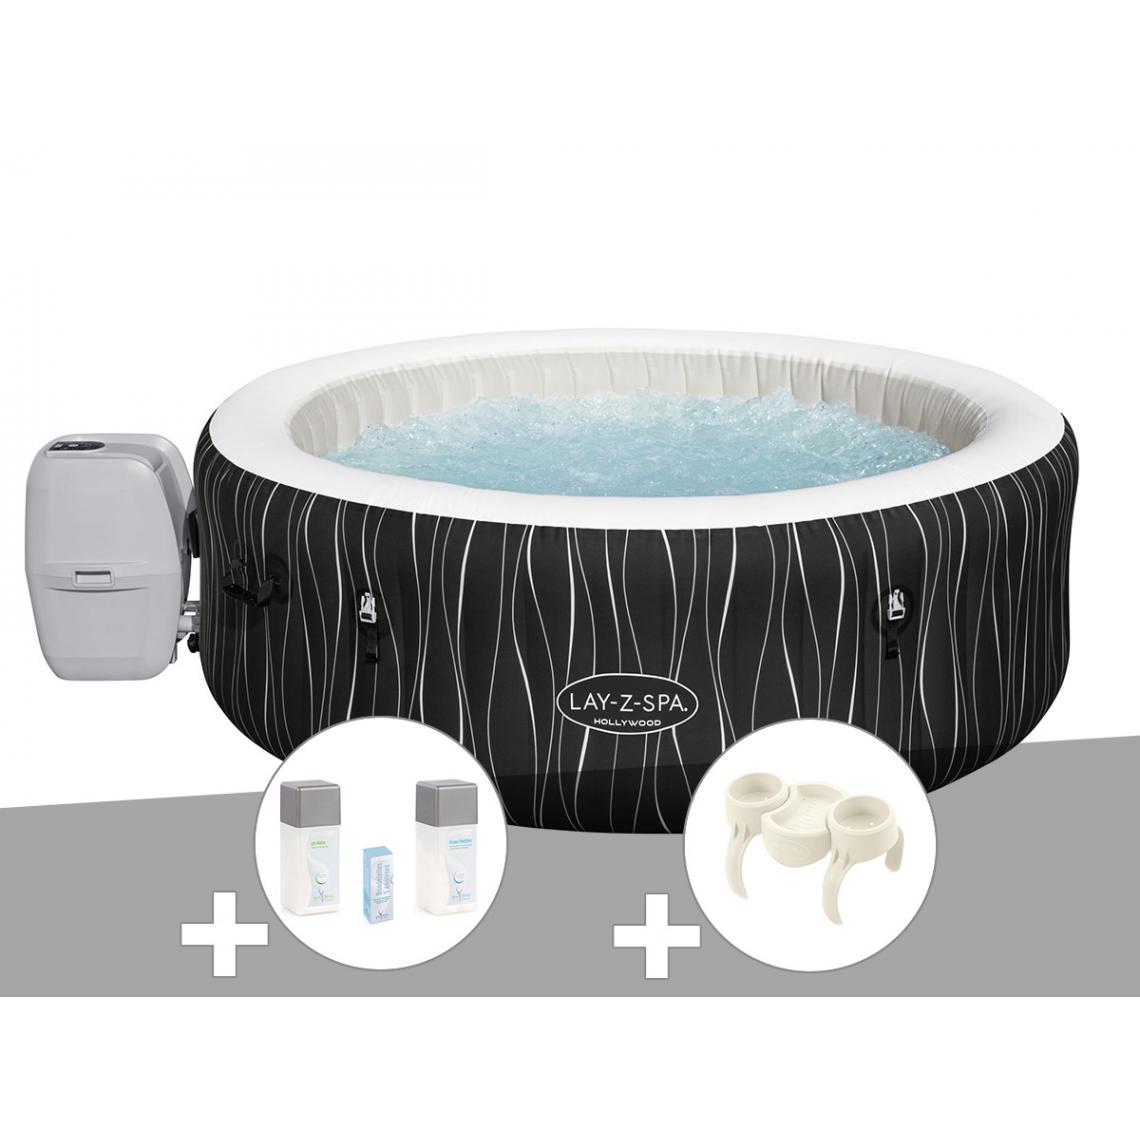 Bestway - Kit spa gonflable Bestway Lay-Z-Spa Hollywood rond Airjet 4/6 places + Kit traitement brome + Porte-gobelets - Spa gonflable